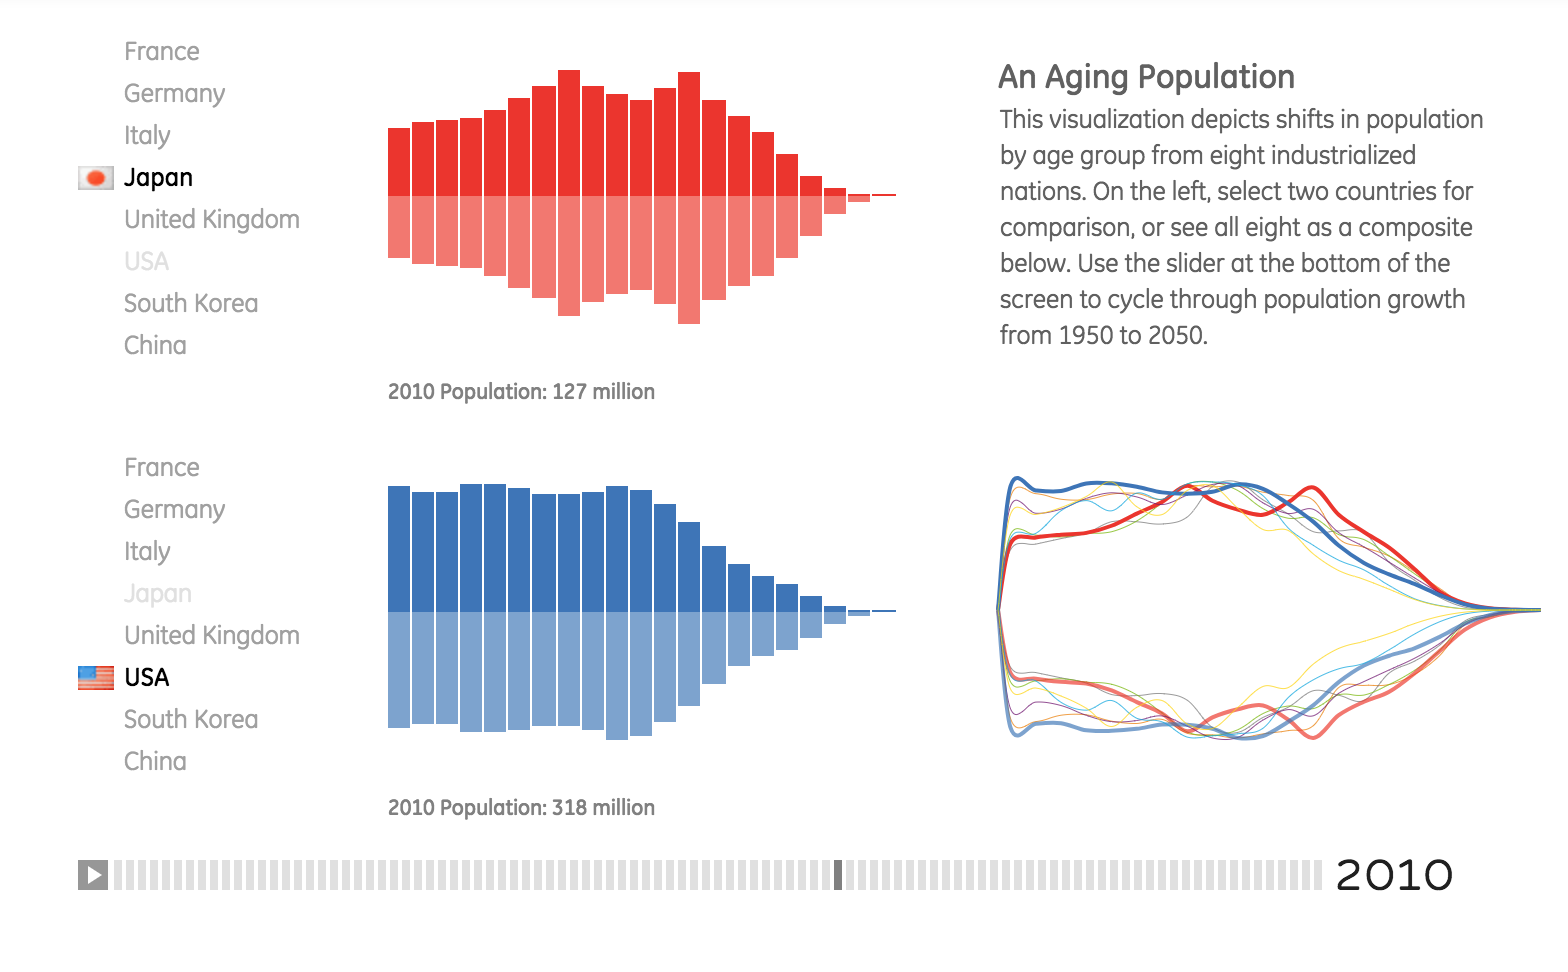 Comparison of aging population in US and Japan